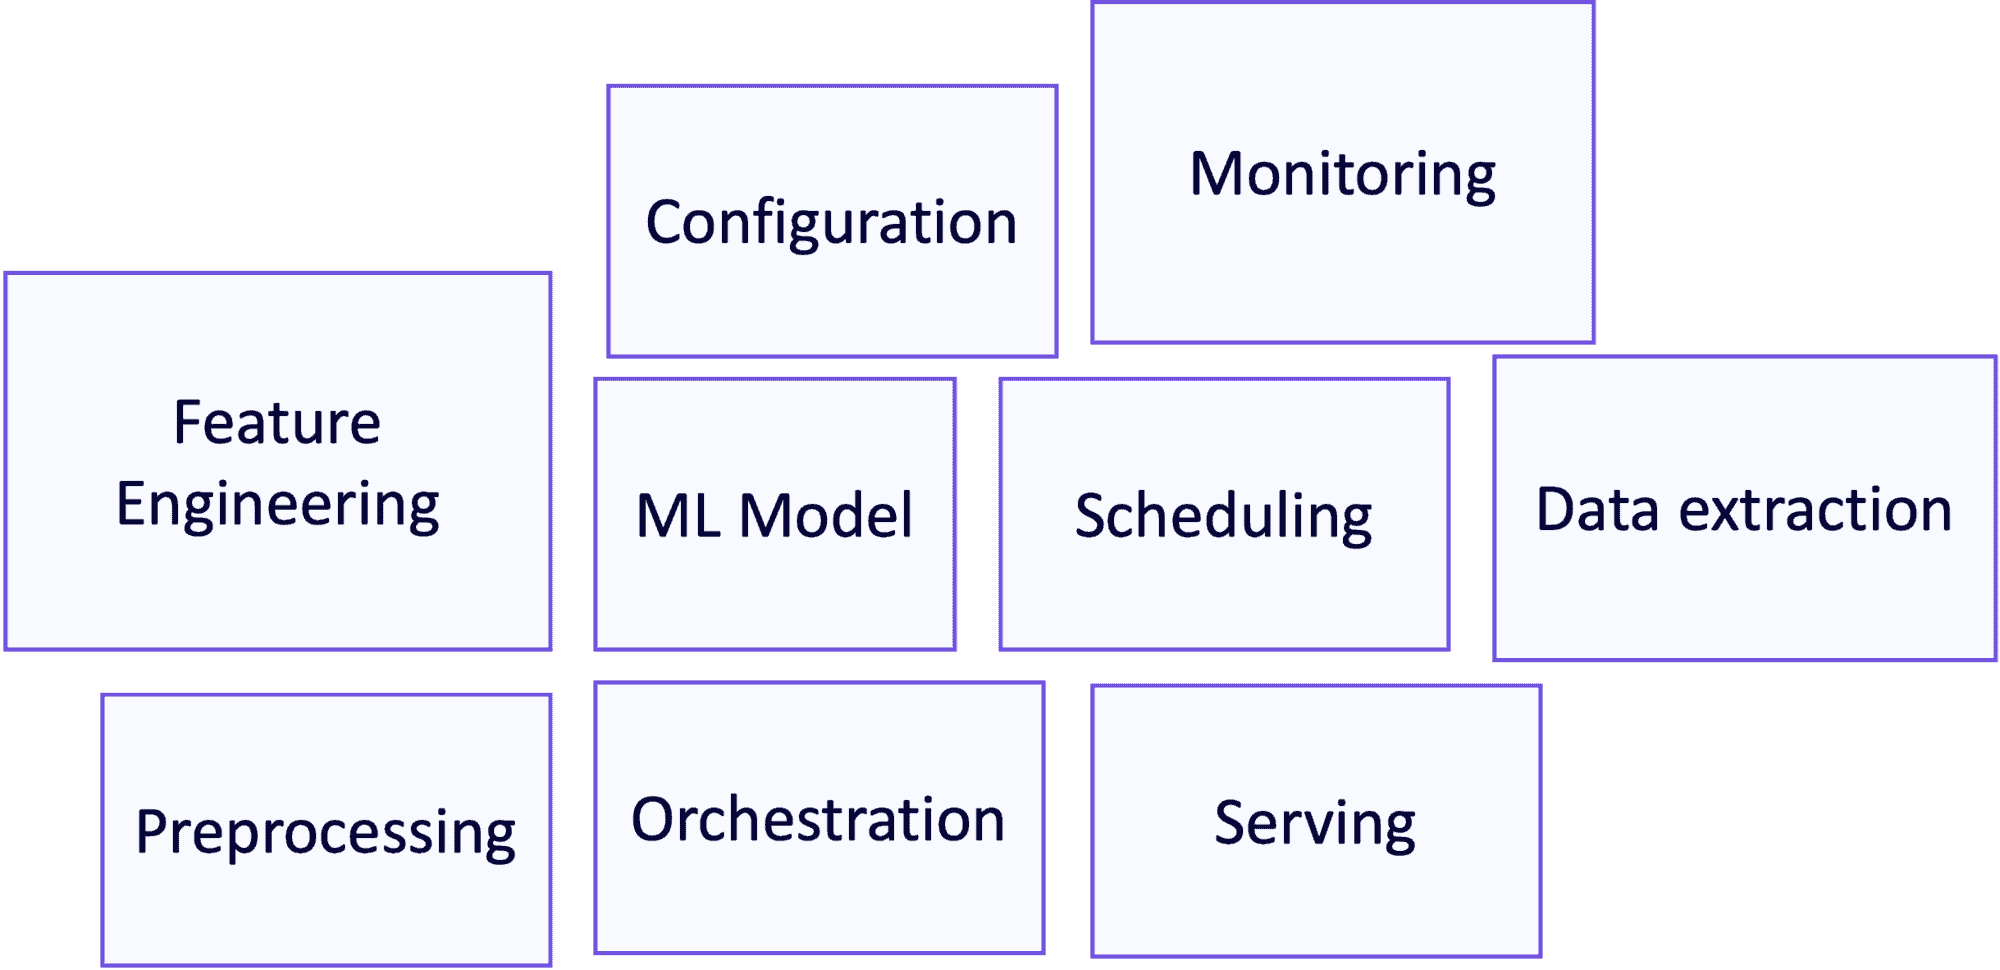 Components in a typical ML system